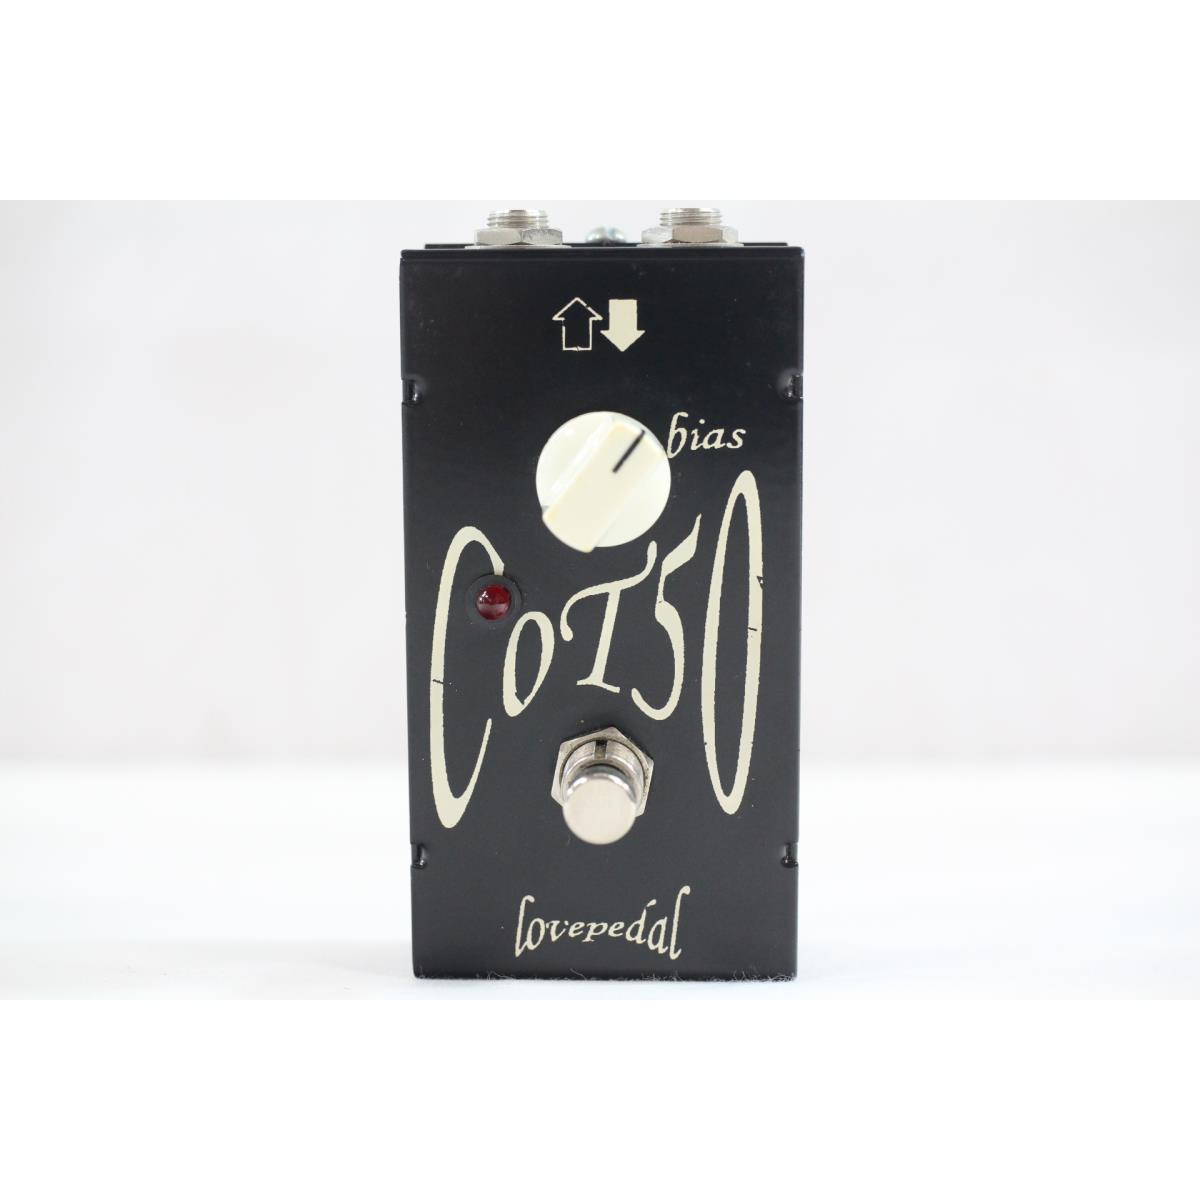 LOVEPEDAL COT50